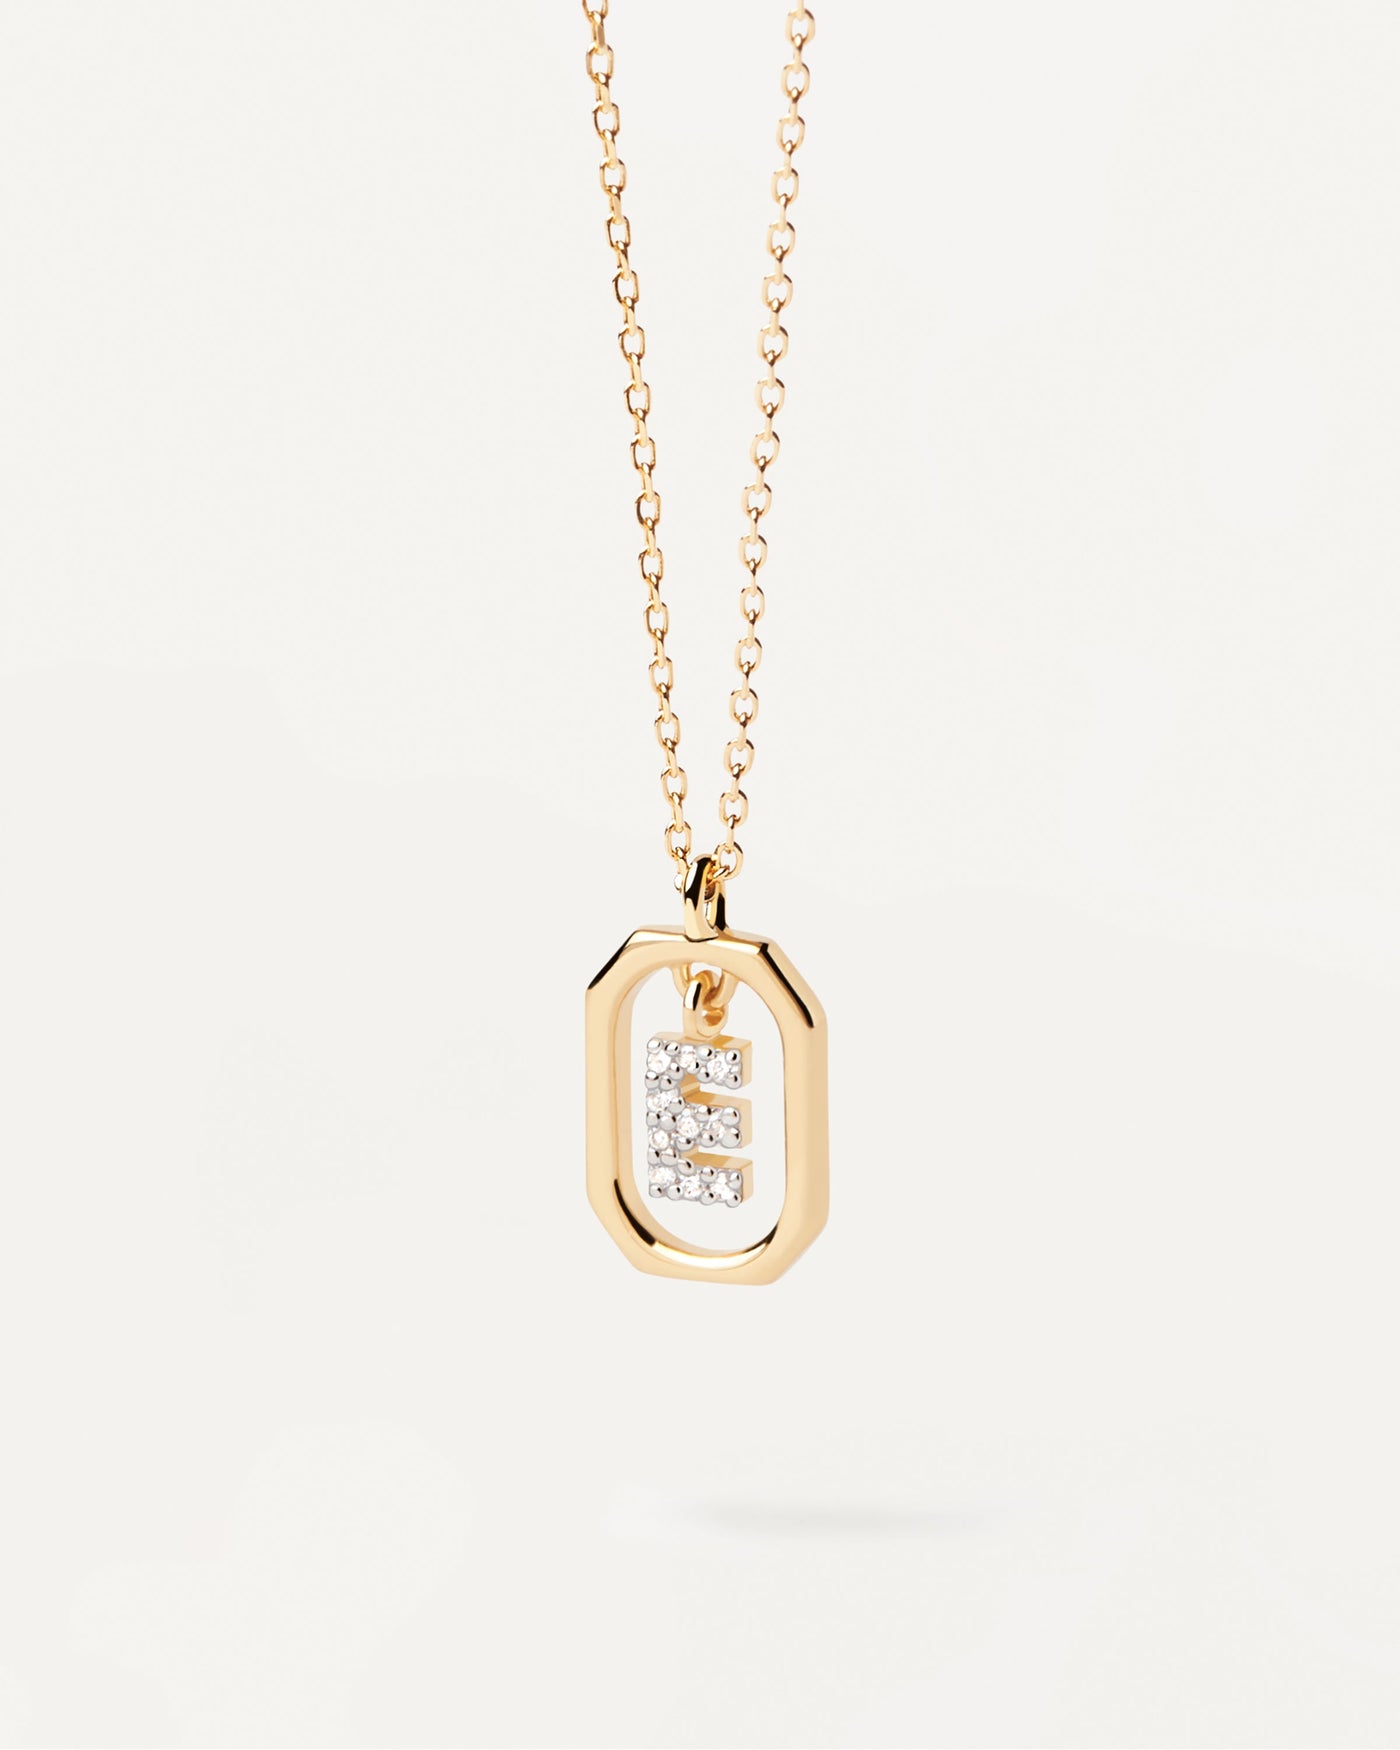 2023 Selection | Mini Letter E Necklace. Small initial E necklace in zirconia inside gold-plated silver octagonal pendant. Get the latest arrival from PDPAOLA. Place your order safely and get this Best Seller. Free Shipping.